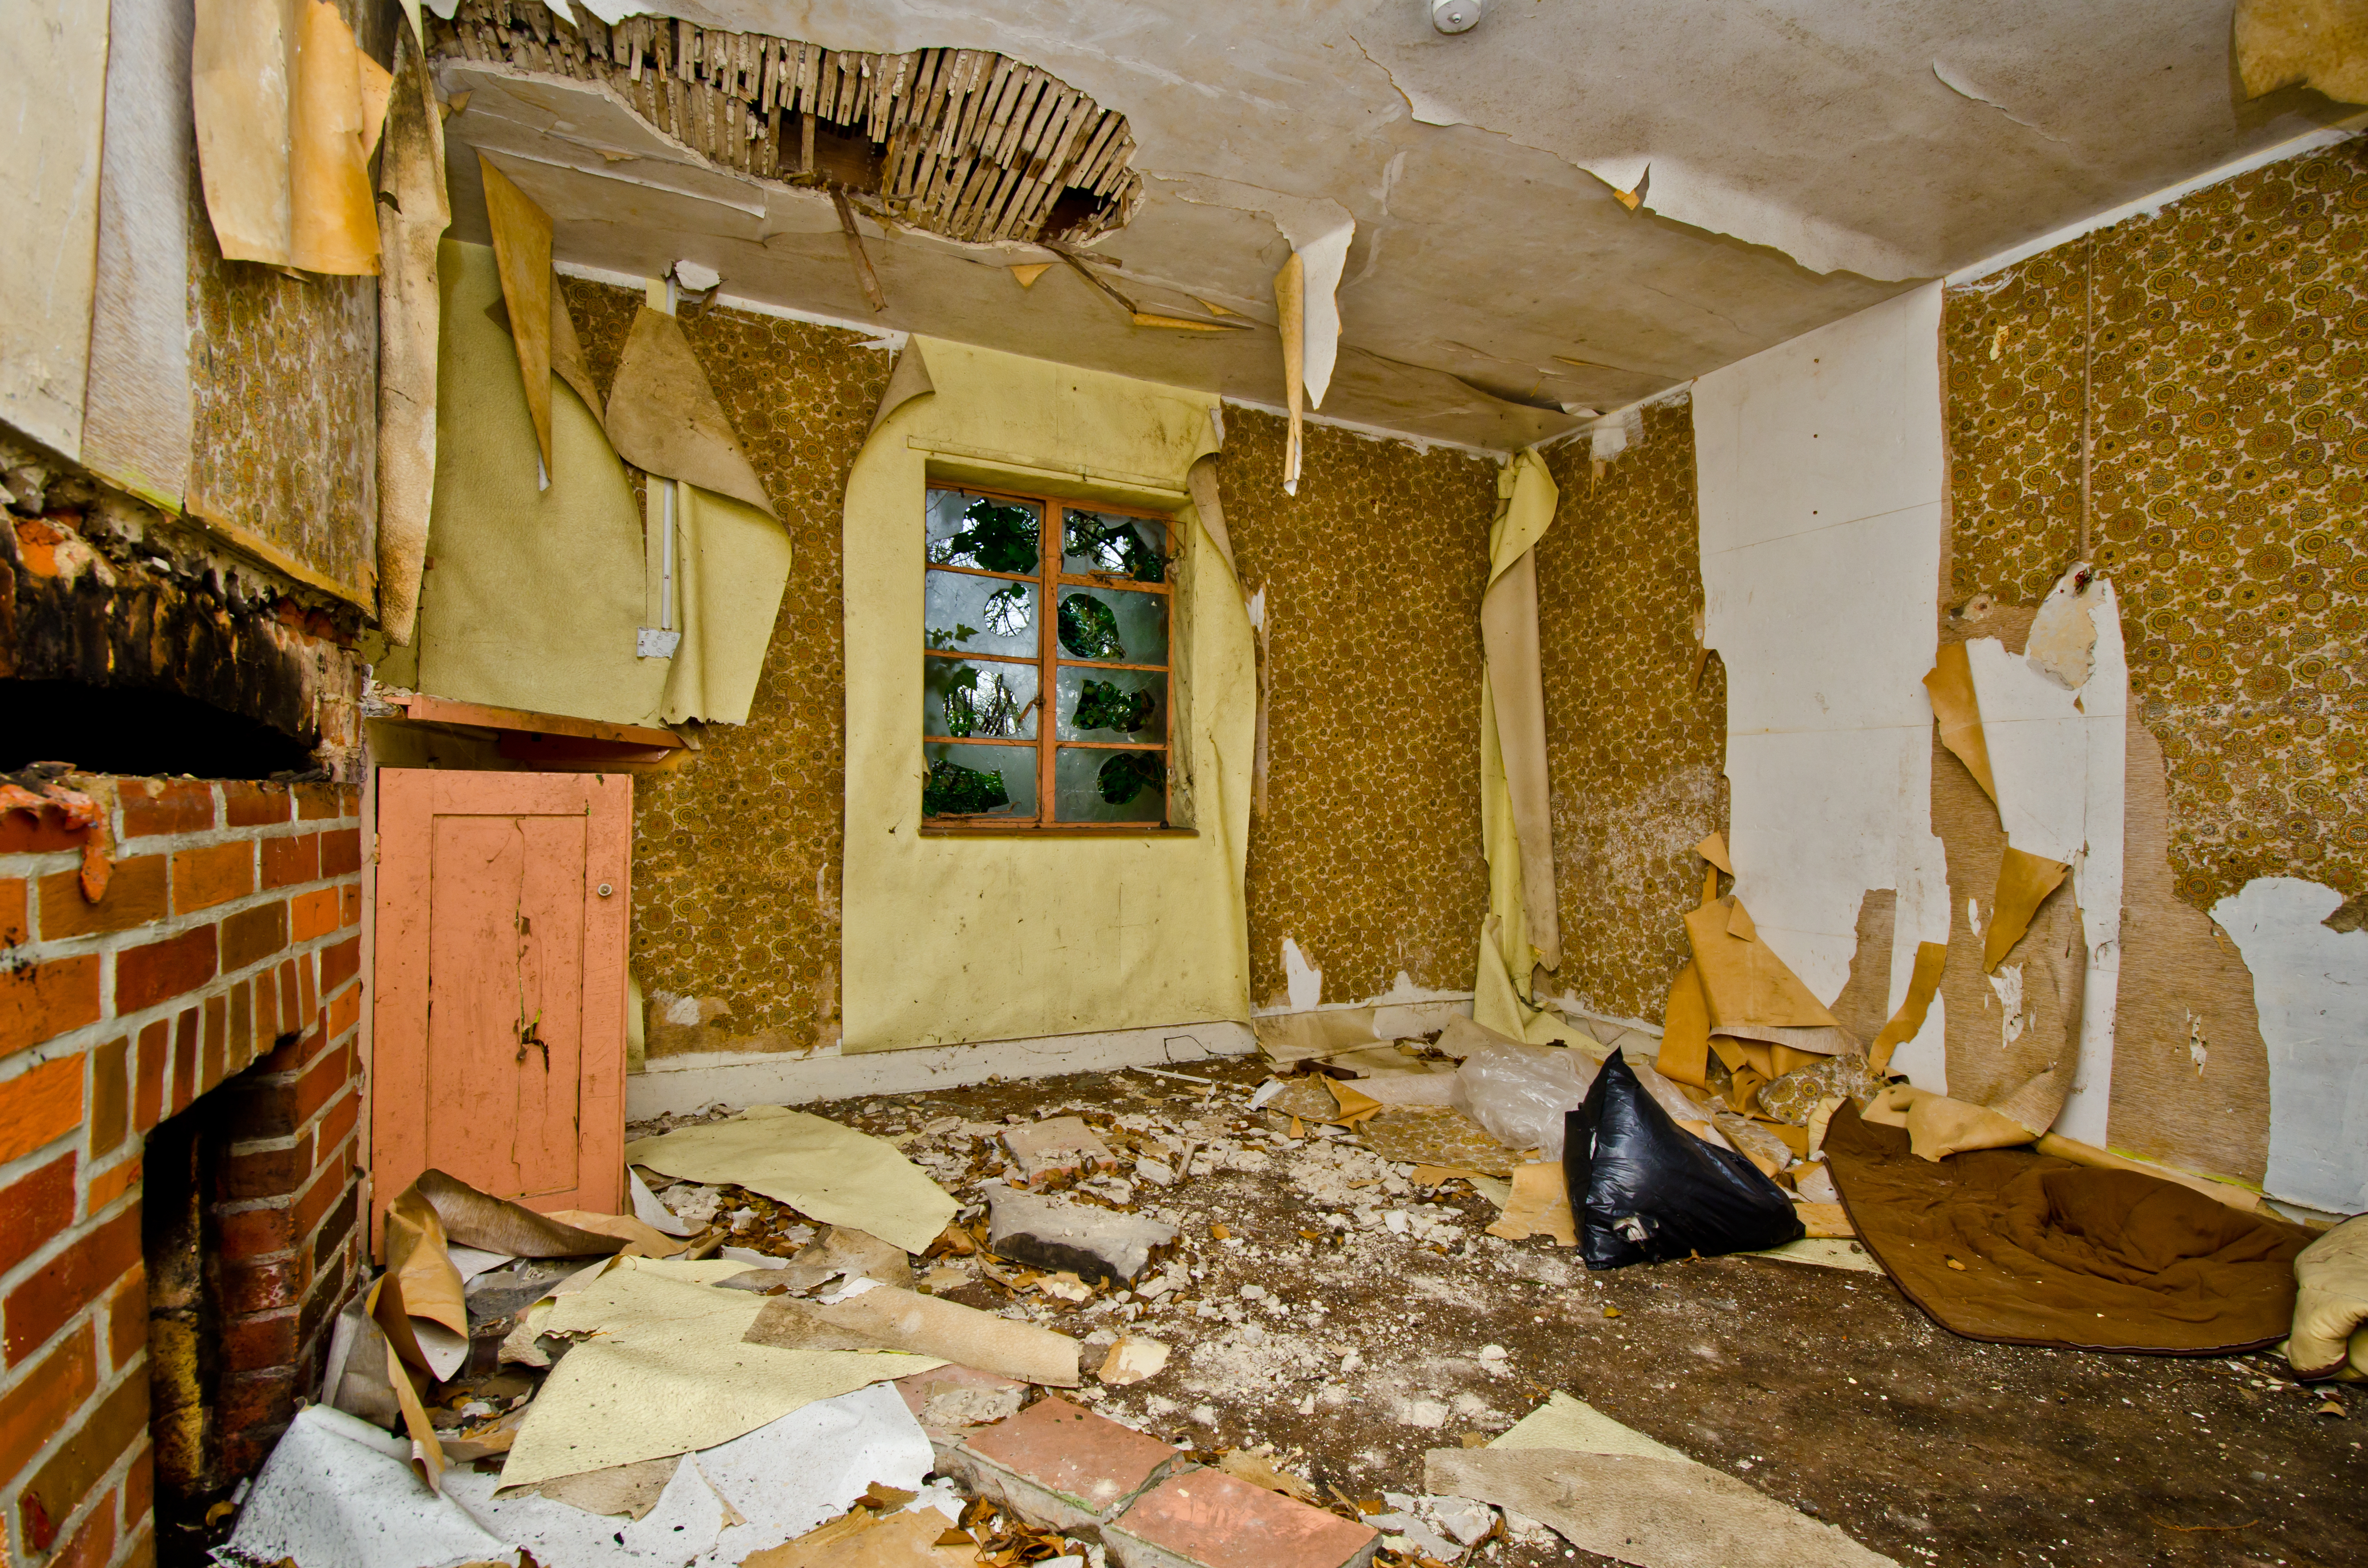 Interior of a badly neglected house | Source: Shutterstock